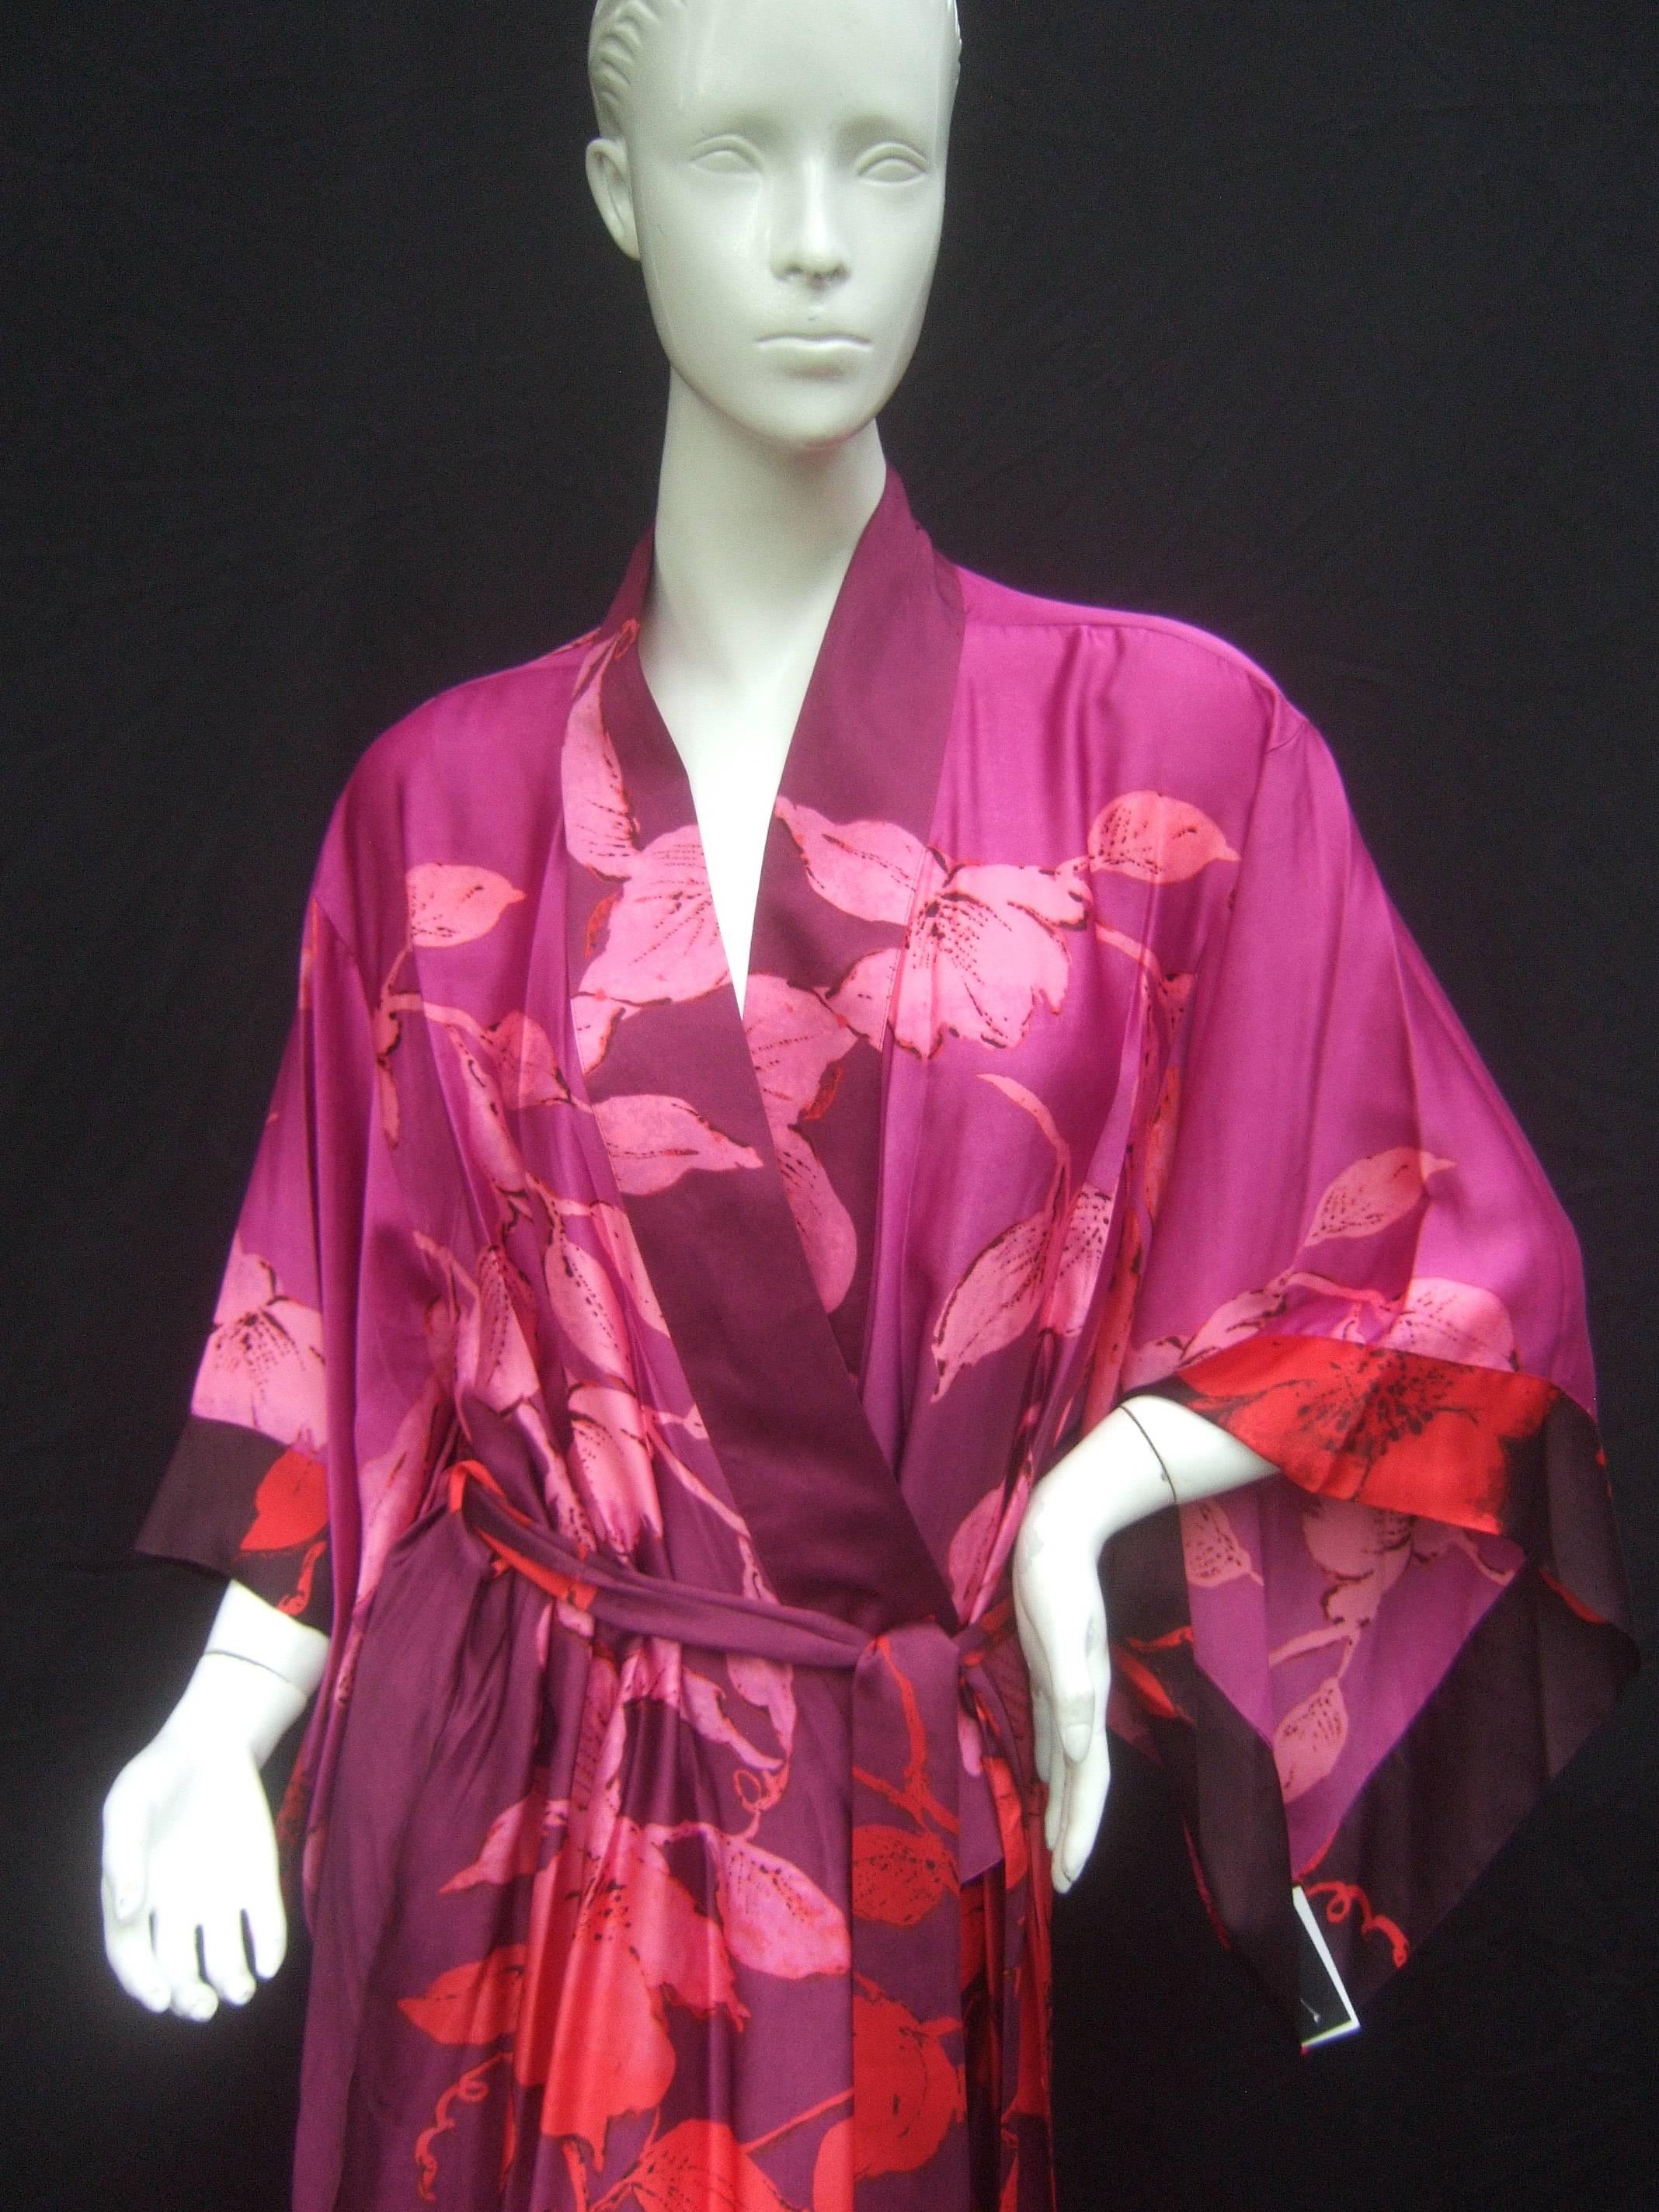 Natori Luxurious floral print robe New with tags 
The stylish robe has a Japanese influence
both in the silhouette and bold floral print 

The sumptuous fabric is illustrated with 
a profusion of flowers. The top section
has a mauve background